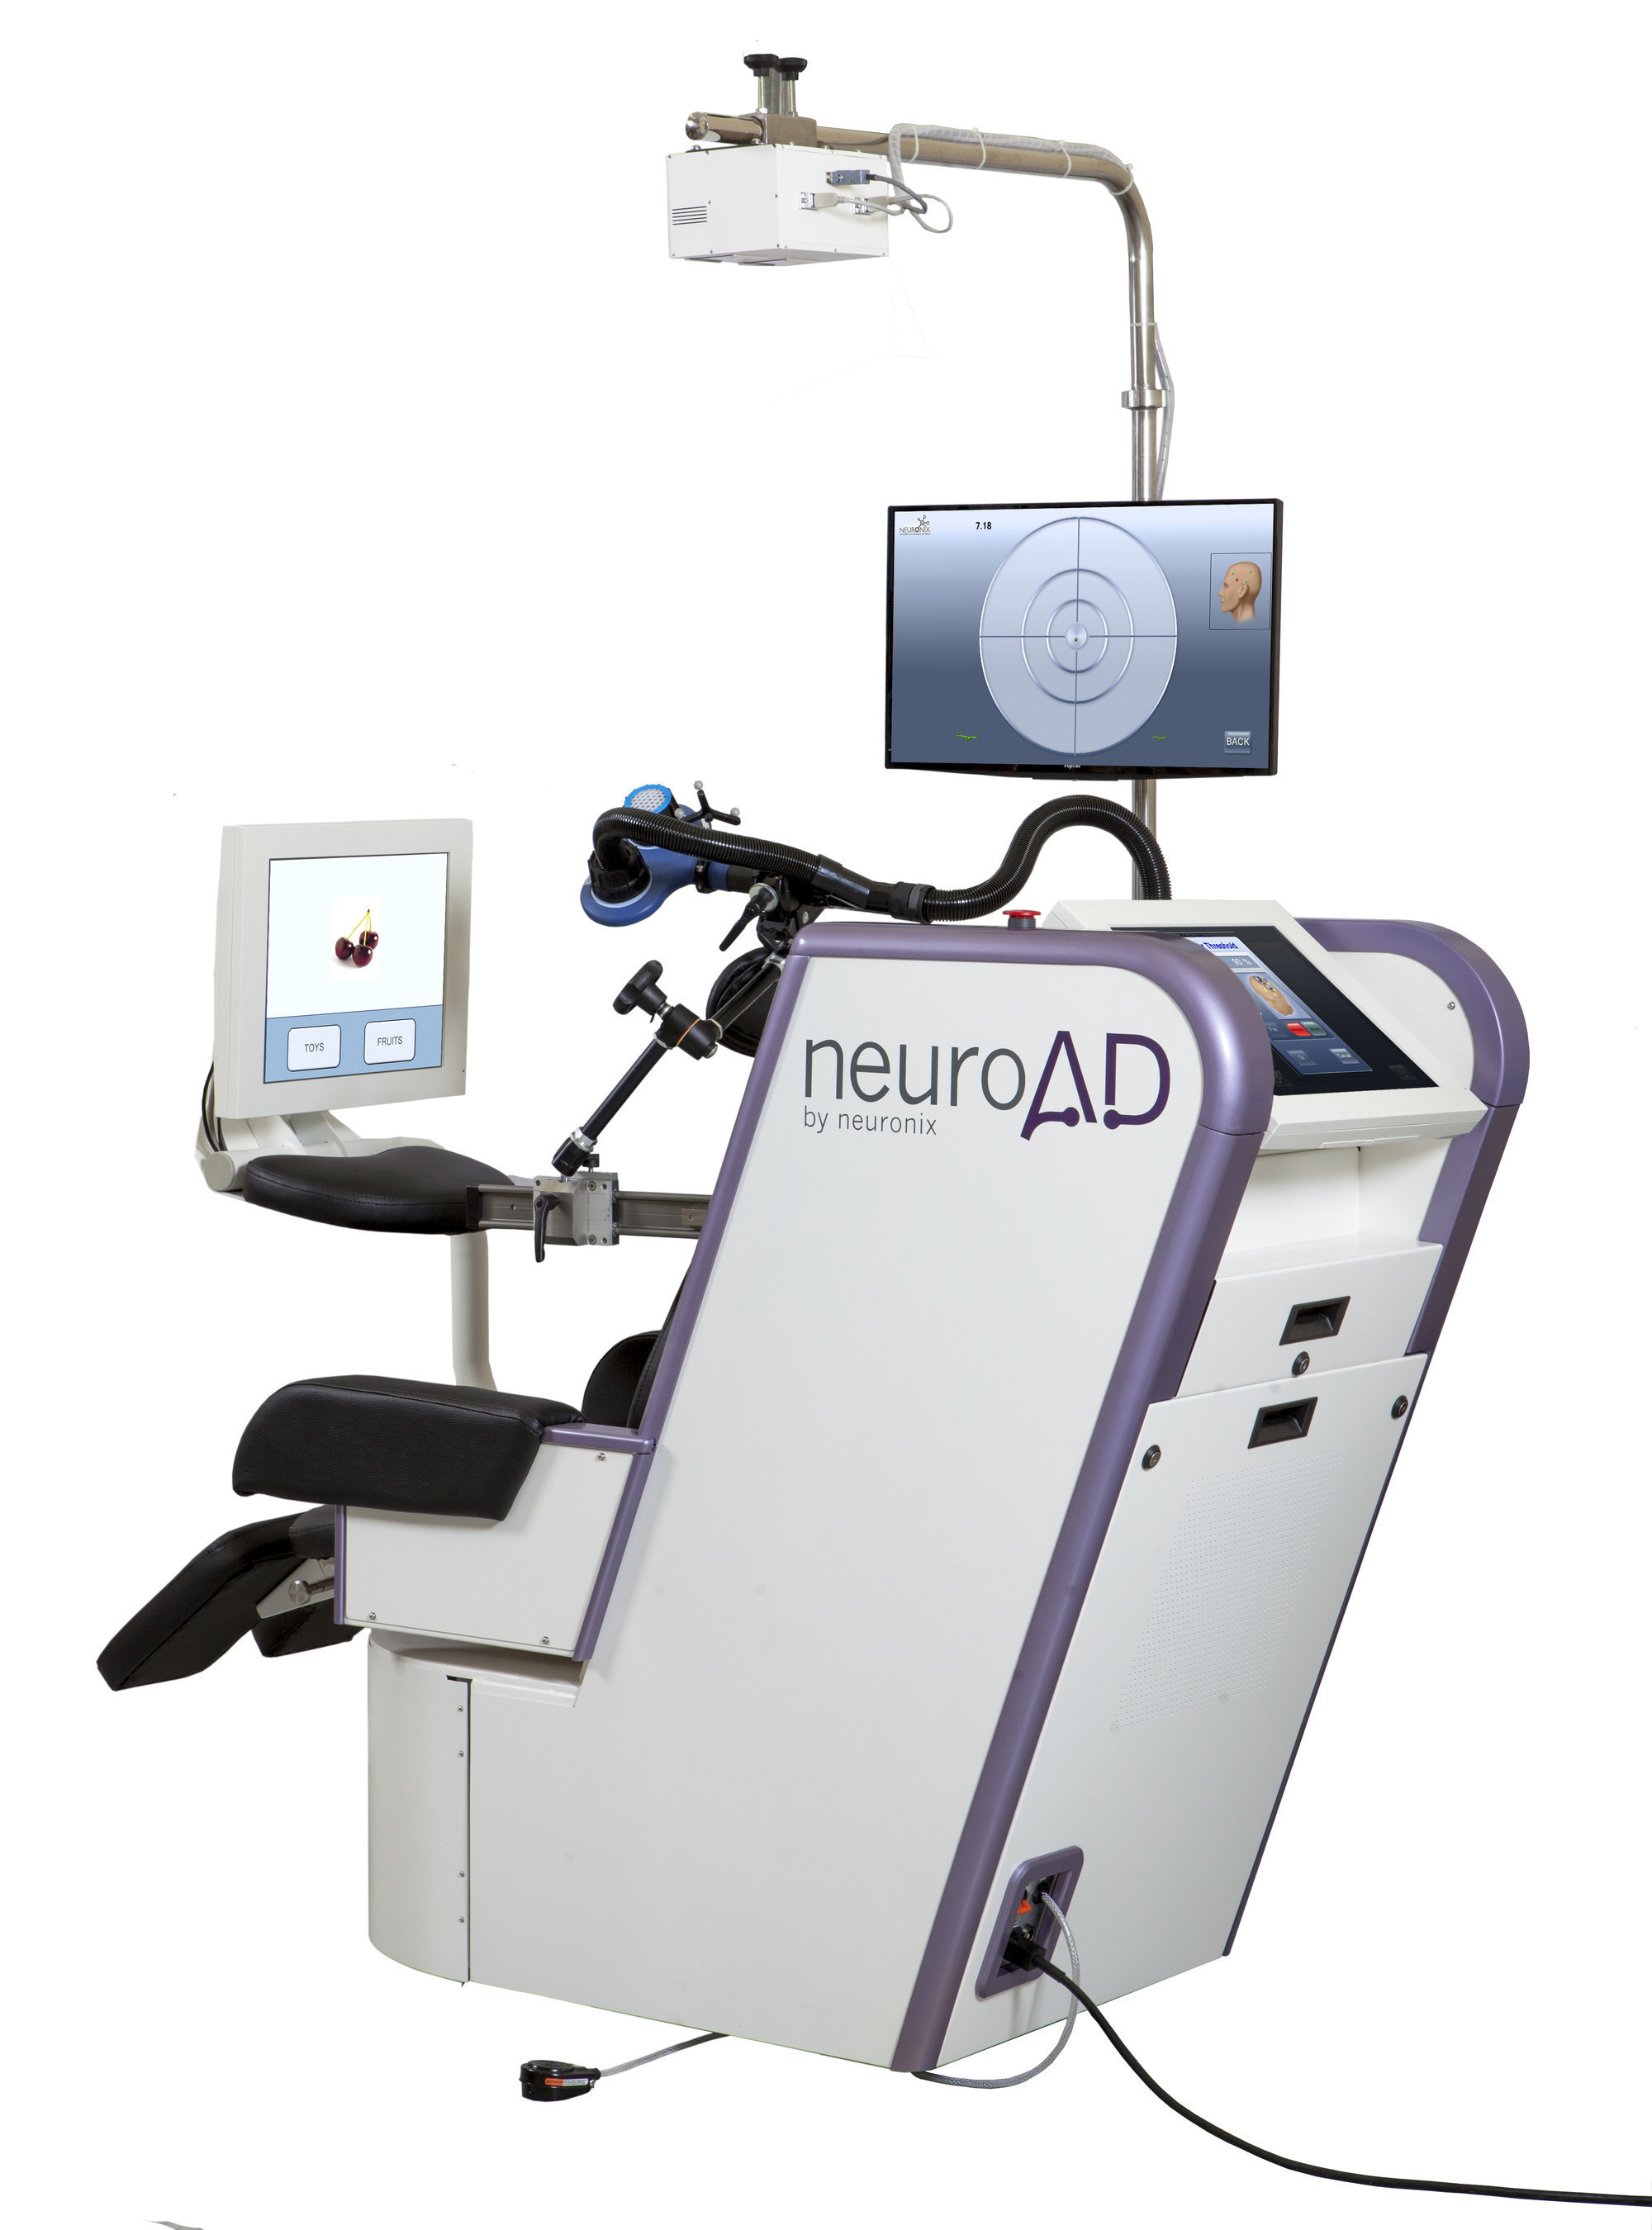 Neuronix announced positive results from its pivotal, double-blind placebo-controlled, multi-center clinical study, for the assessment of safety and efficacy of the neuroAD Therapy System, in the treatment of mild to moderate Alzheimer's disease. Neuronix has filed a U.S. FDA application seeking regulatory clearance to market its neuroAD Therapy System for treatment of Alzheimer's disease. If approved, the neuroAD Therapy System would be the first medical device ever cleared by the FDA for treatment of Alzheimer's. neuroAD is a patent-protected, non-invasive medical device, uniquely combining transcranial magnetic stimulation (TMS) with cognitive training, to concurrently target brain regions affected.